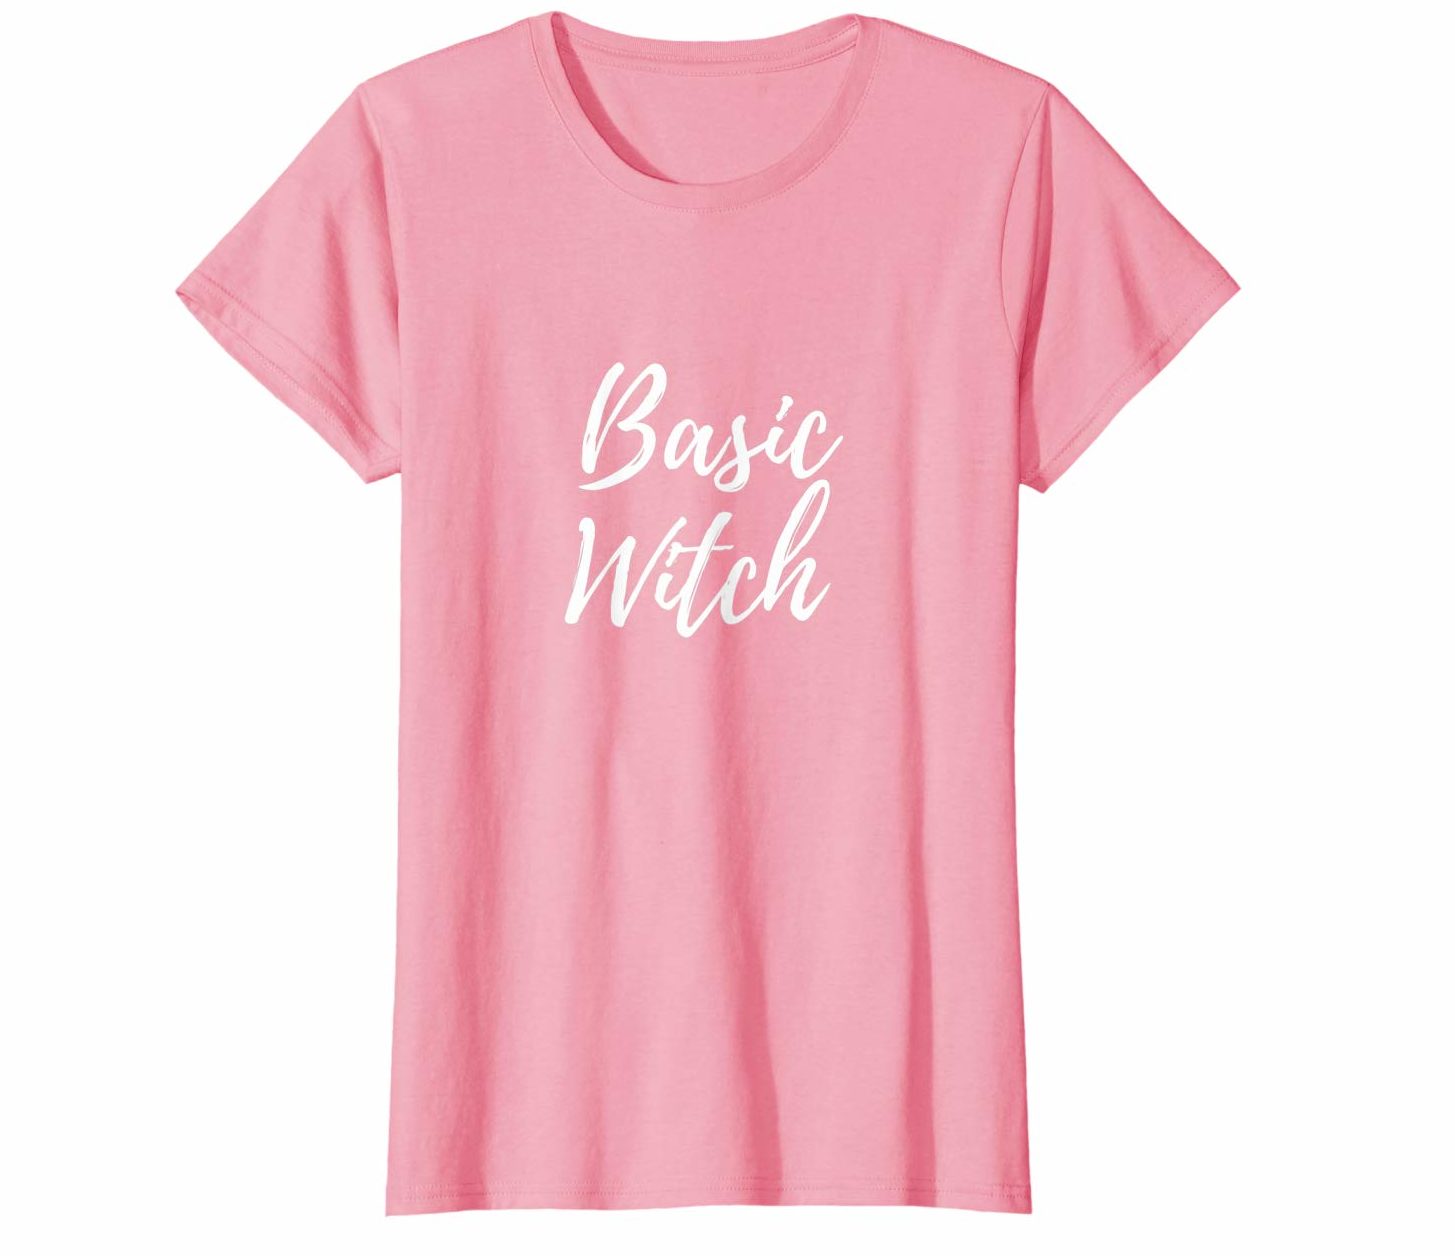 Funny Halloween Shirts 2022: Basic Witch T-Shirt for Women 2022